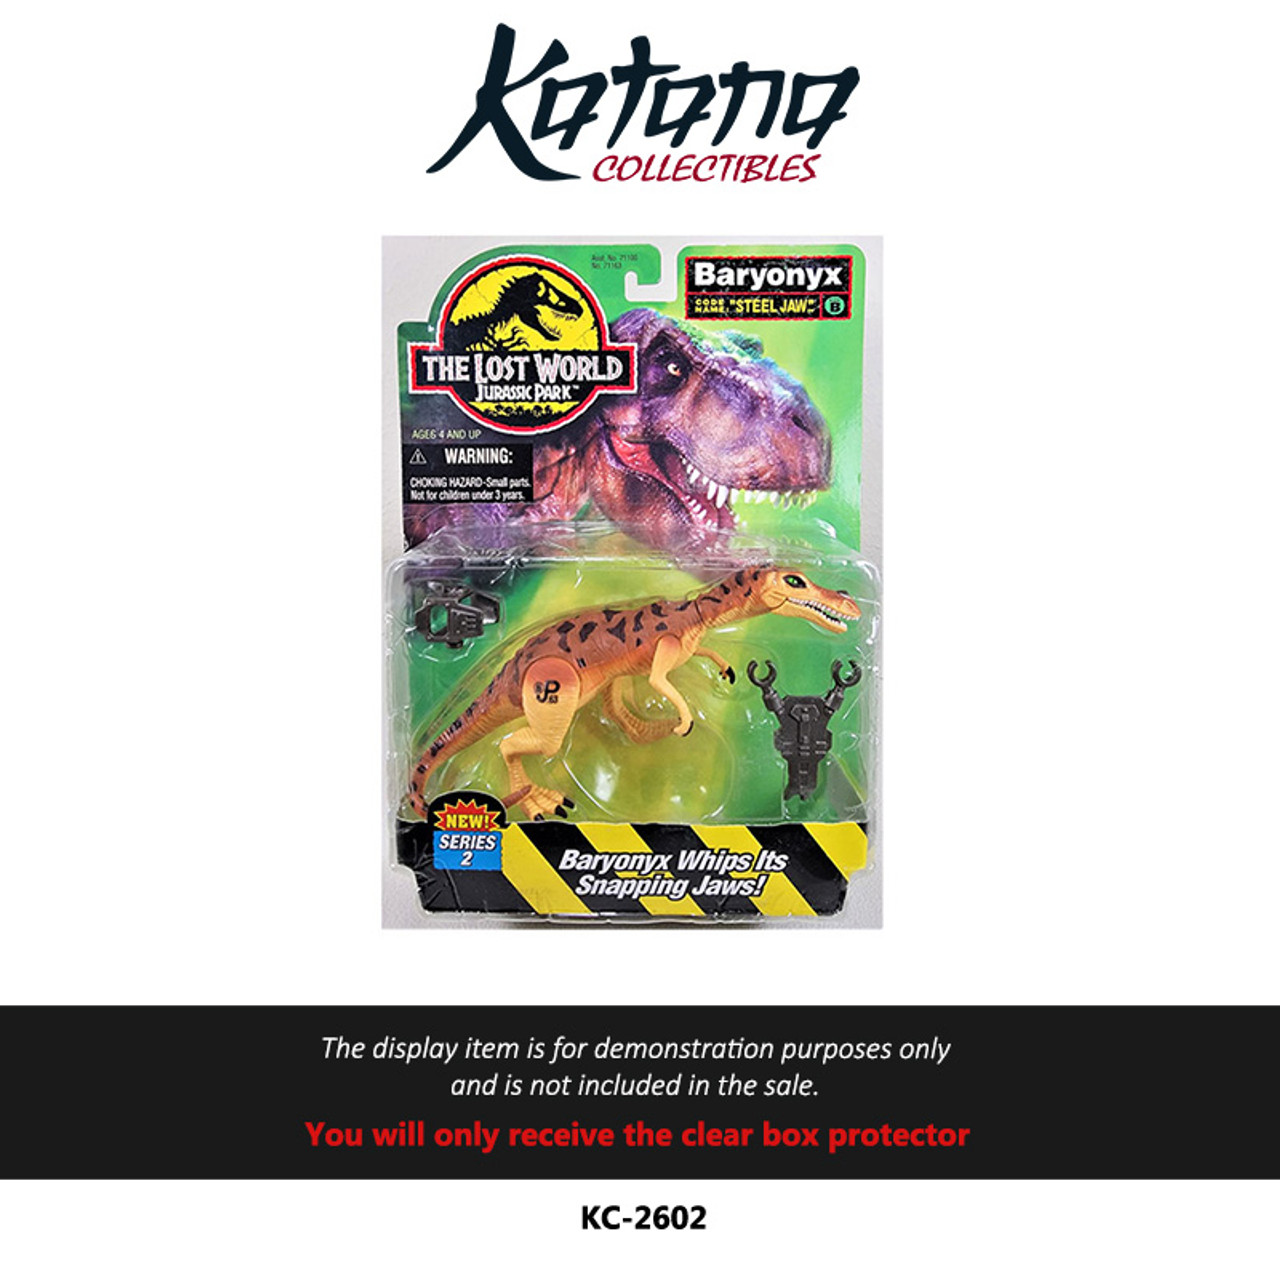 Katana Collectibles Protector For Kenner Jurassic Park The Lost World Dinosaurs MOC Blister Pack